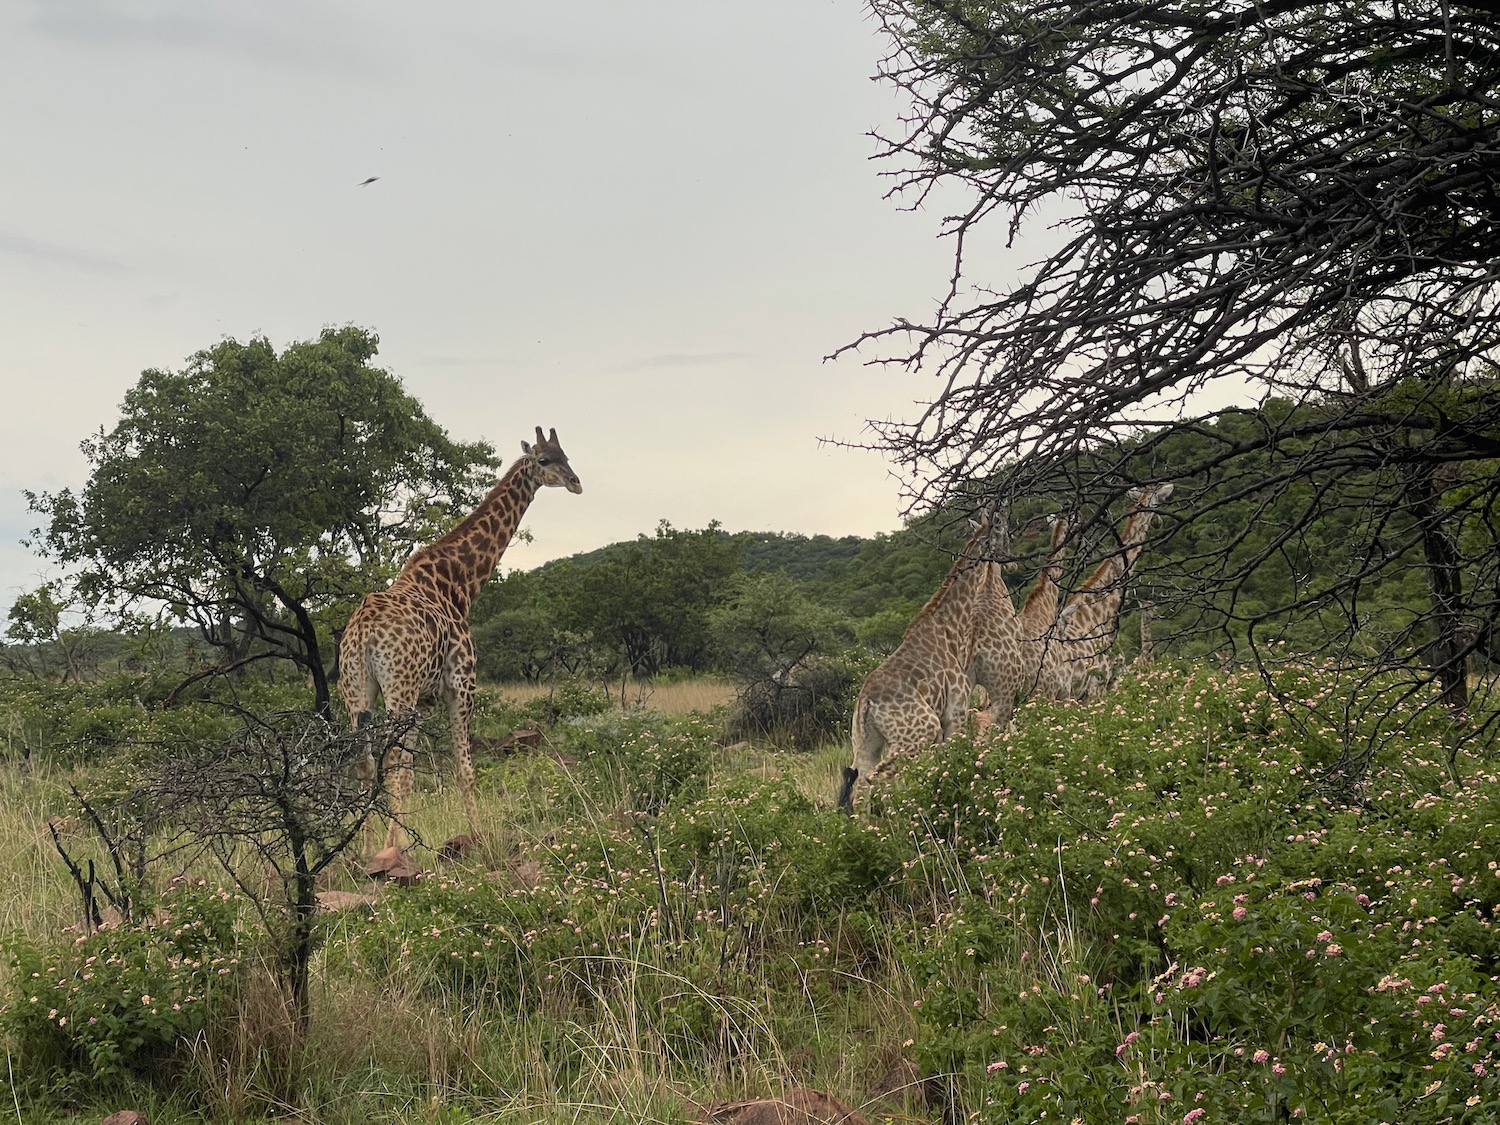 a group of giraffes in a grassy area